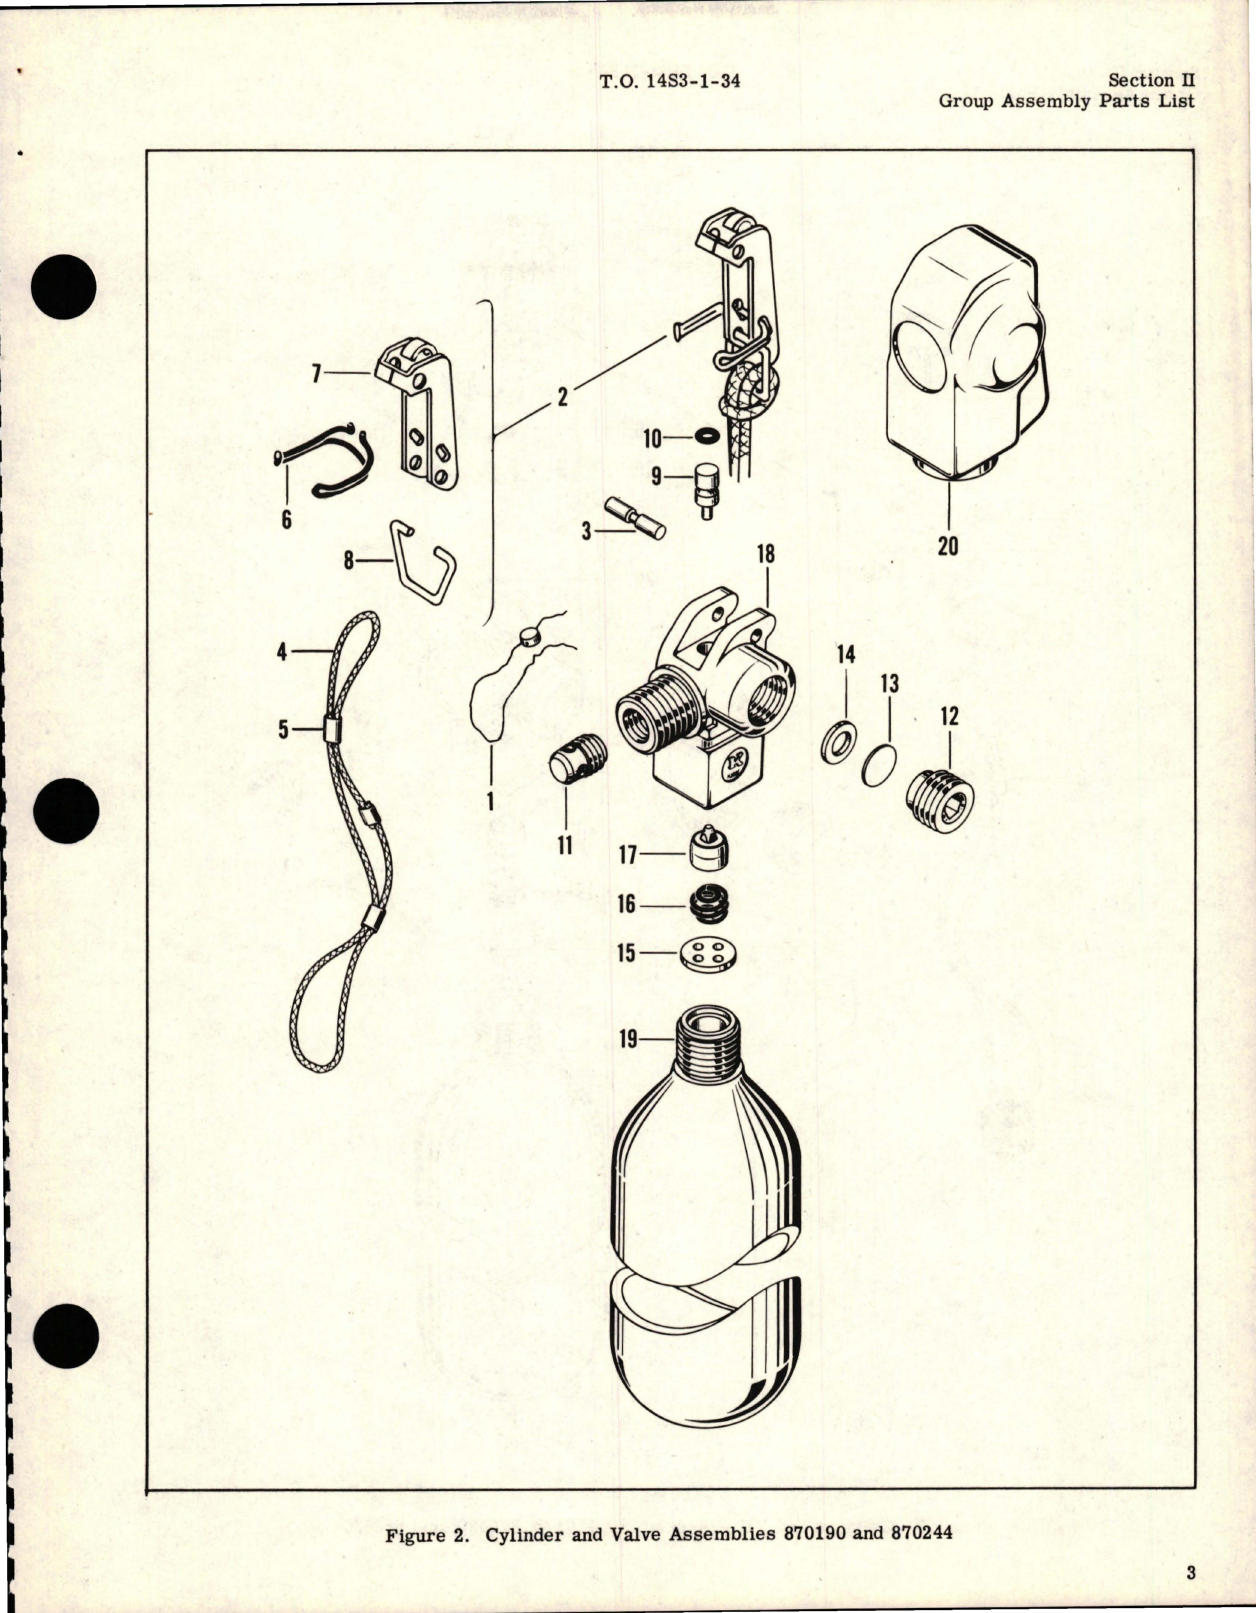 Sample page 7 from AirCorps Library document: Illustrated Parts Breakdown for Life Raft Inflation Equipment